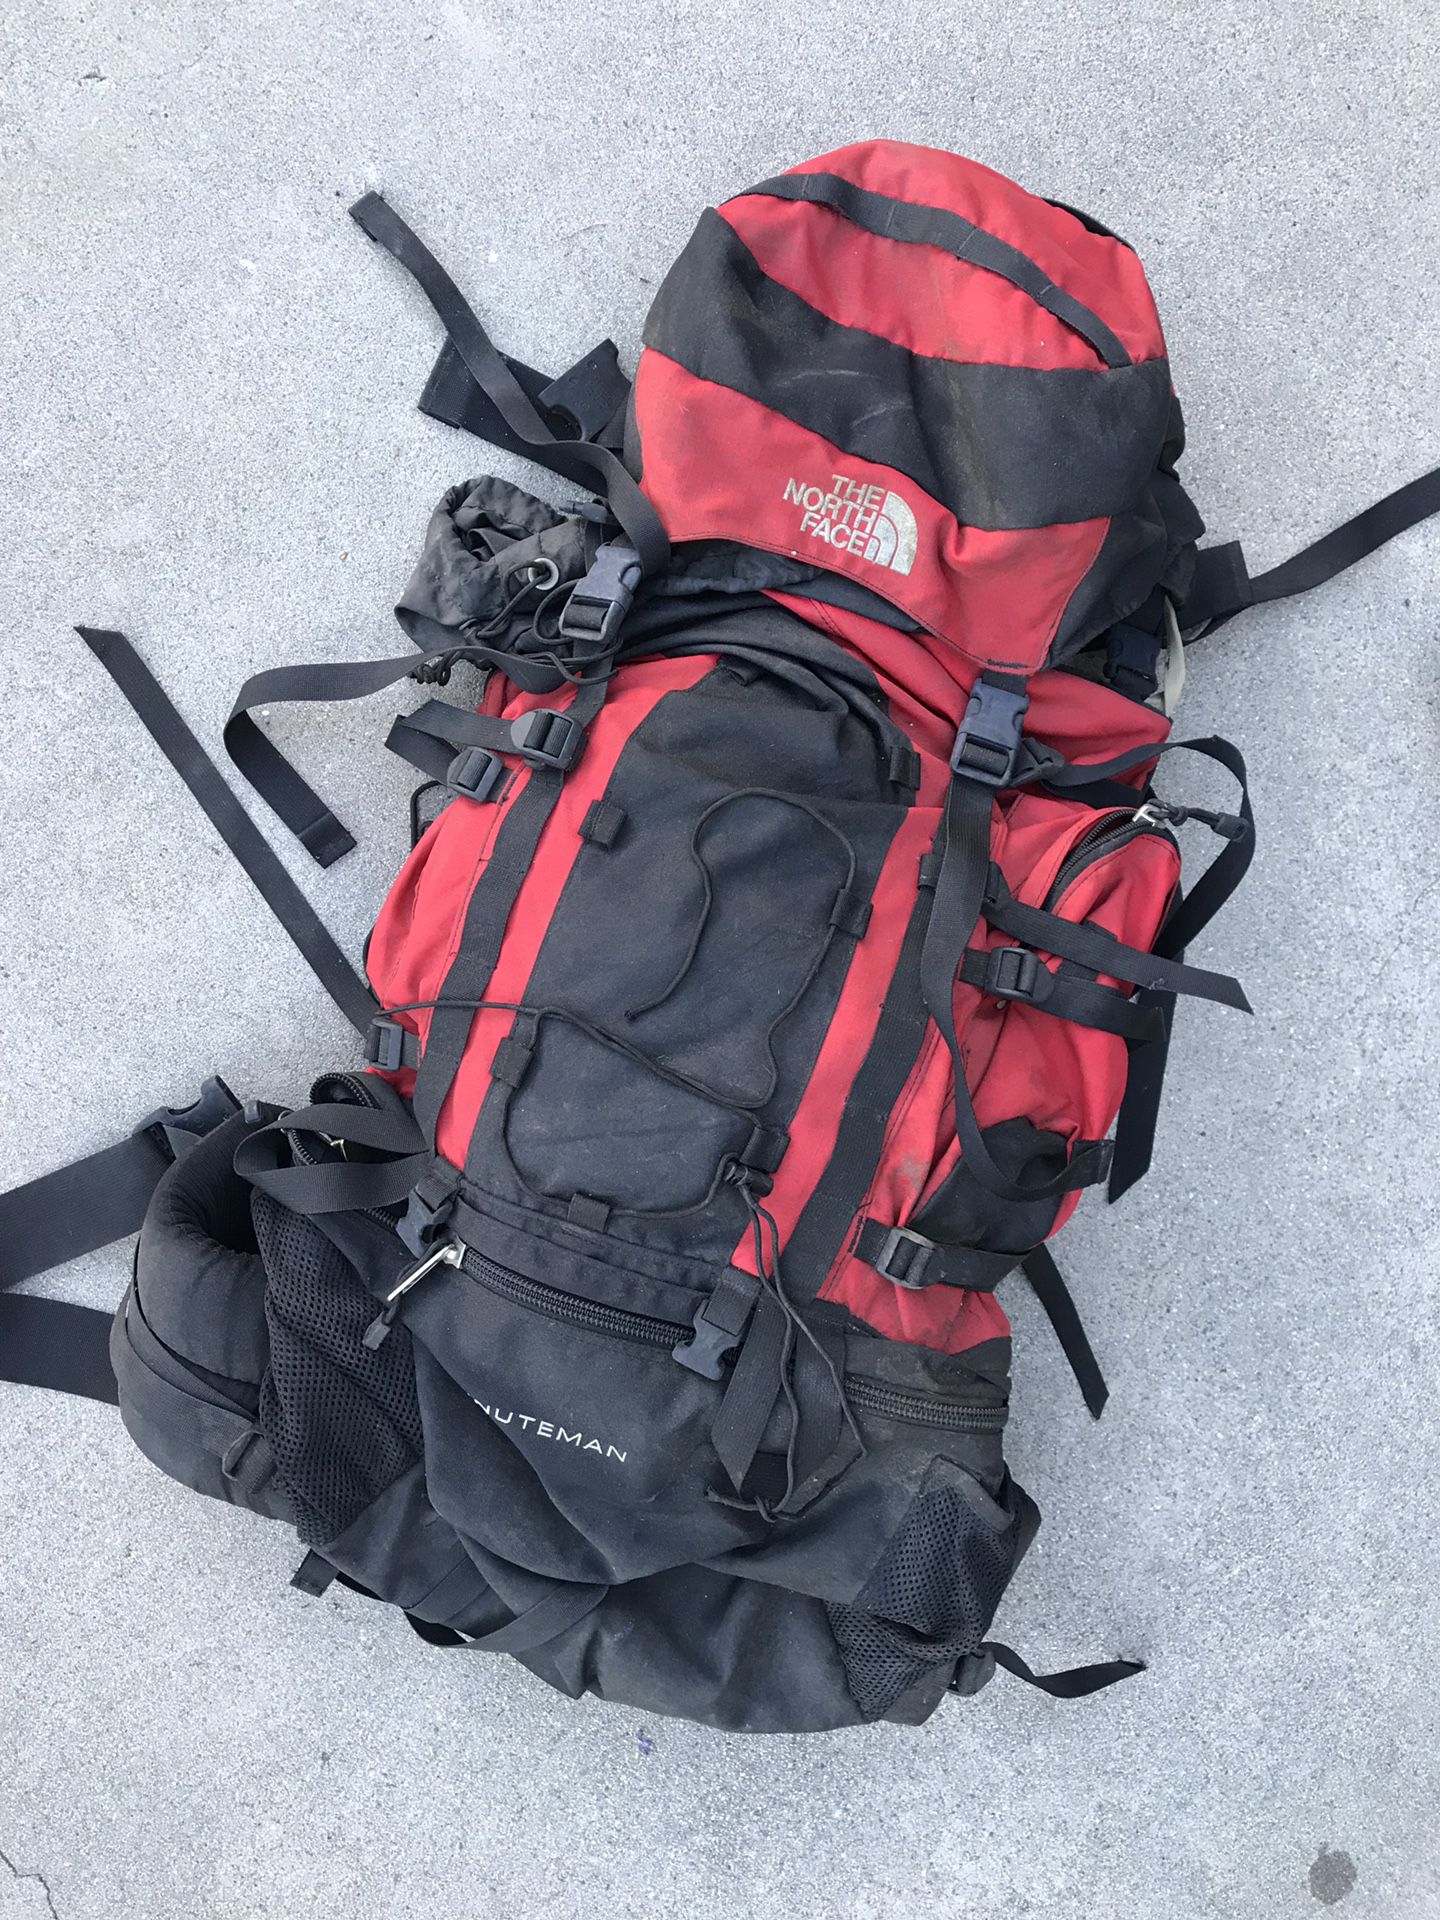 Used north face hiking backpack